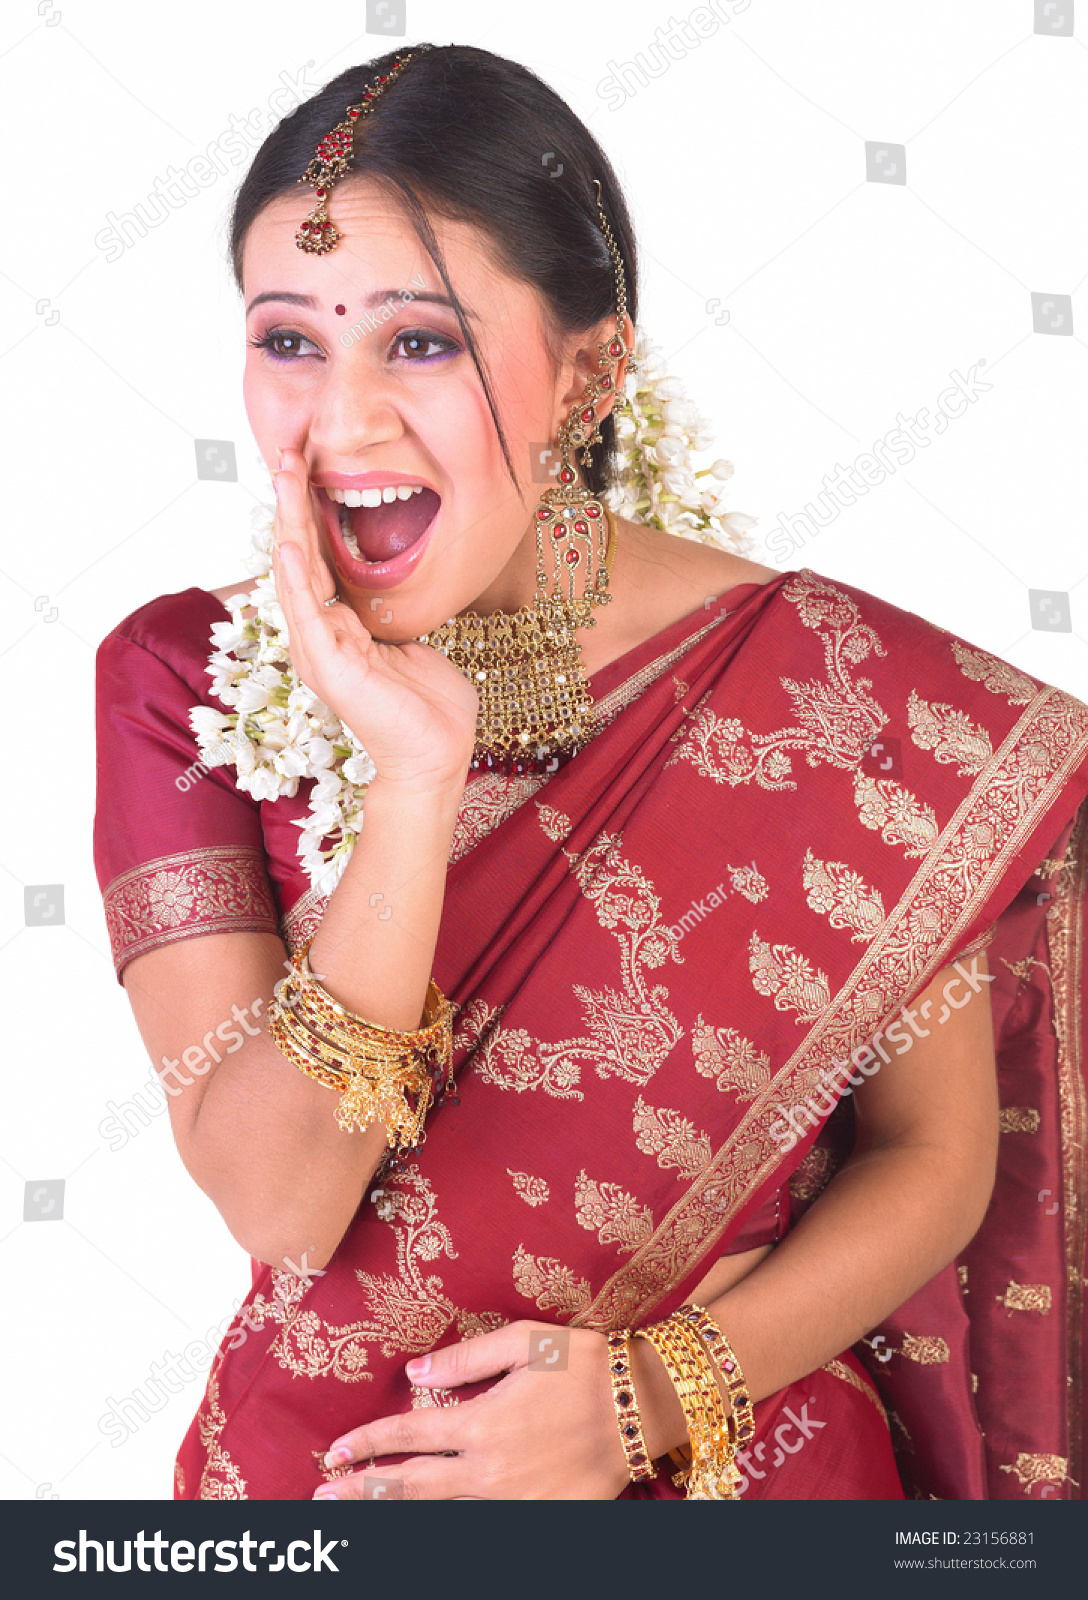 Indian Girl In A Shouting Expression Stock Photo 23156881 : Shutterstock